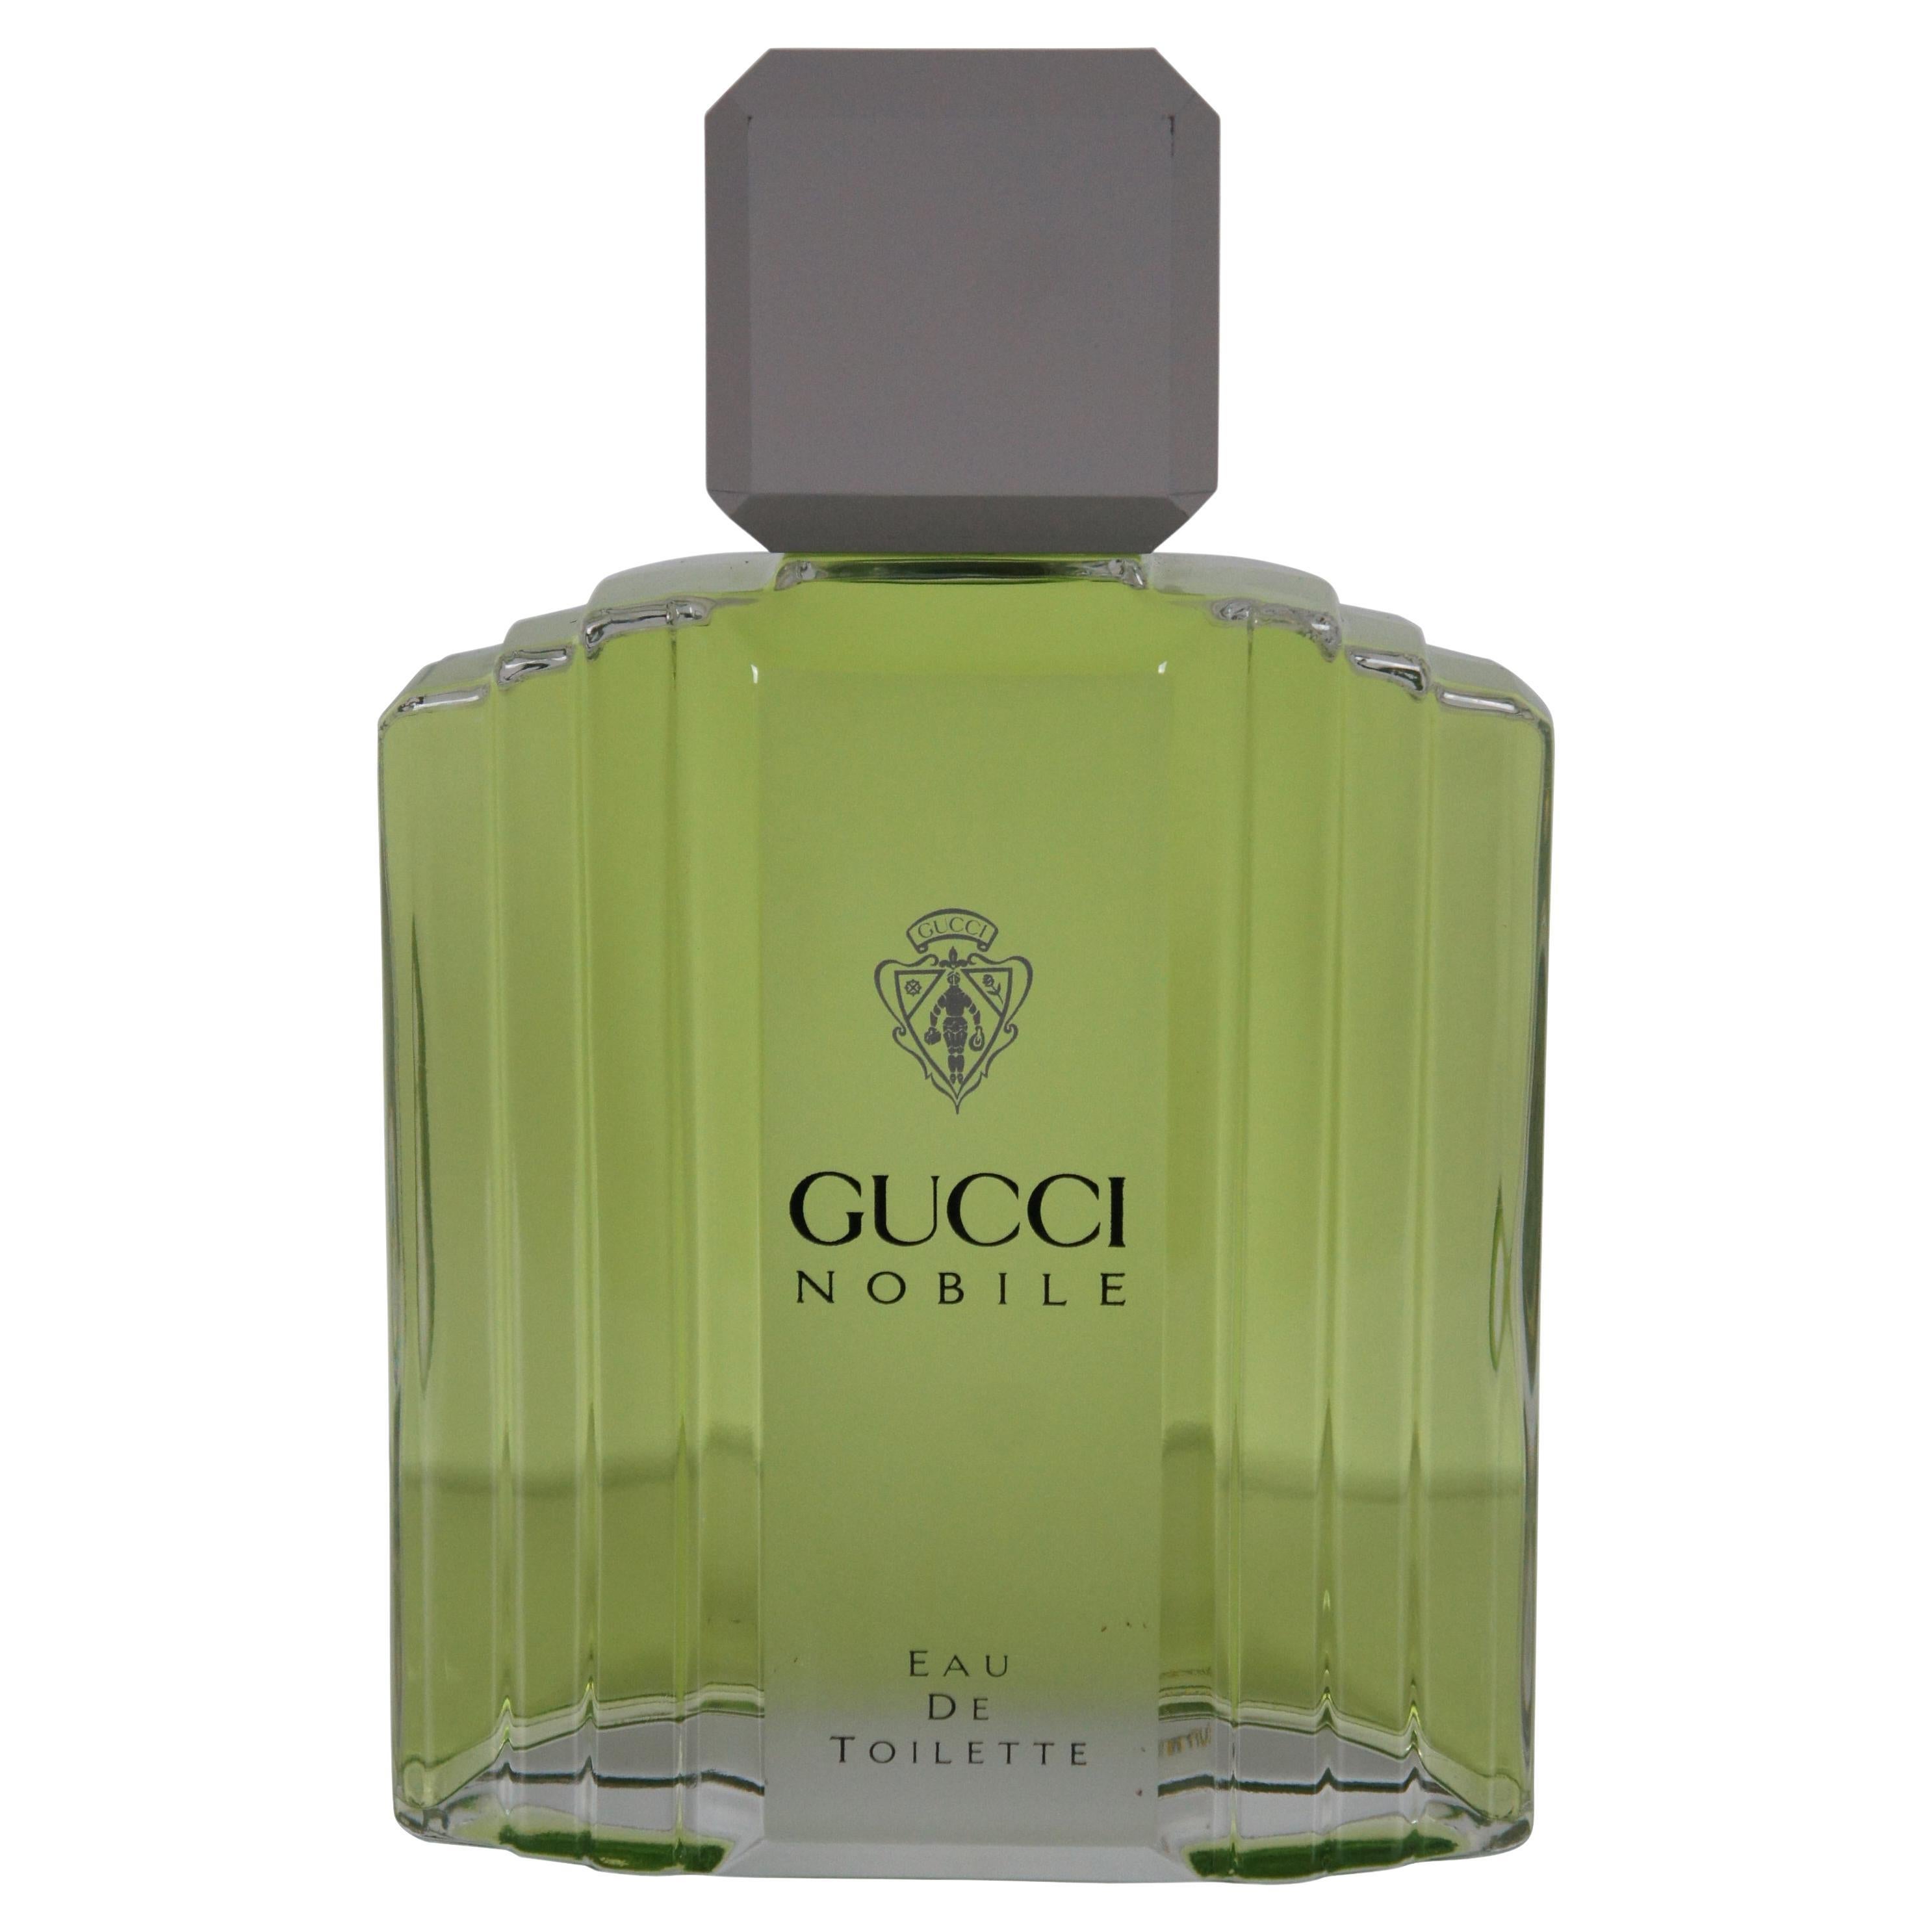 Gucci Nobile Eau Toilette Factice Dummy Cologne Perfume Bottle Store  Display For Sale at 1stDibs | gucci nobile eau de toilette, gucci nobile  cologne price, gucci flora old bottle